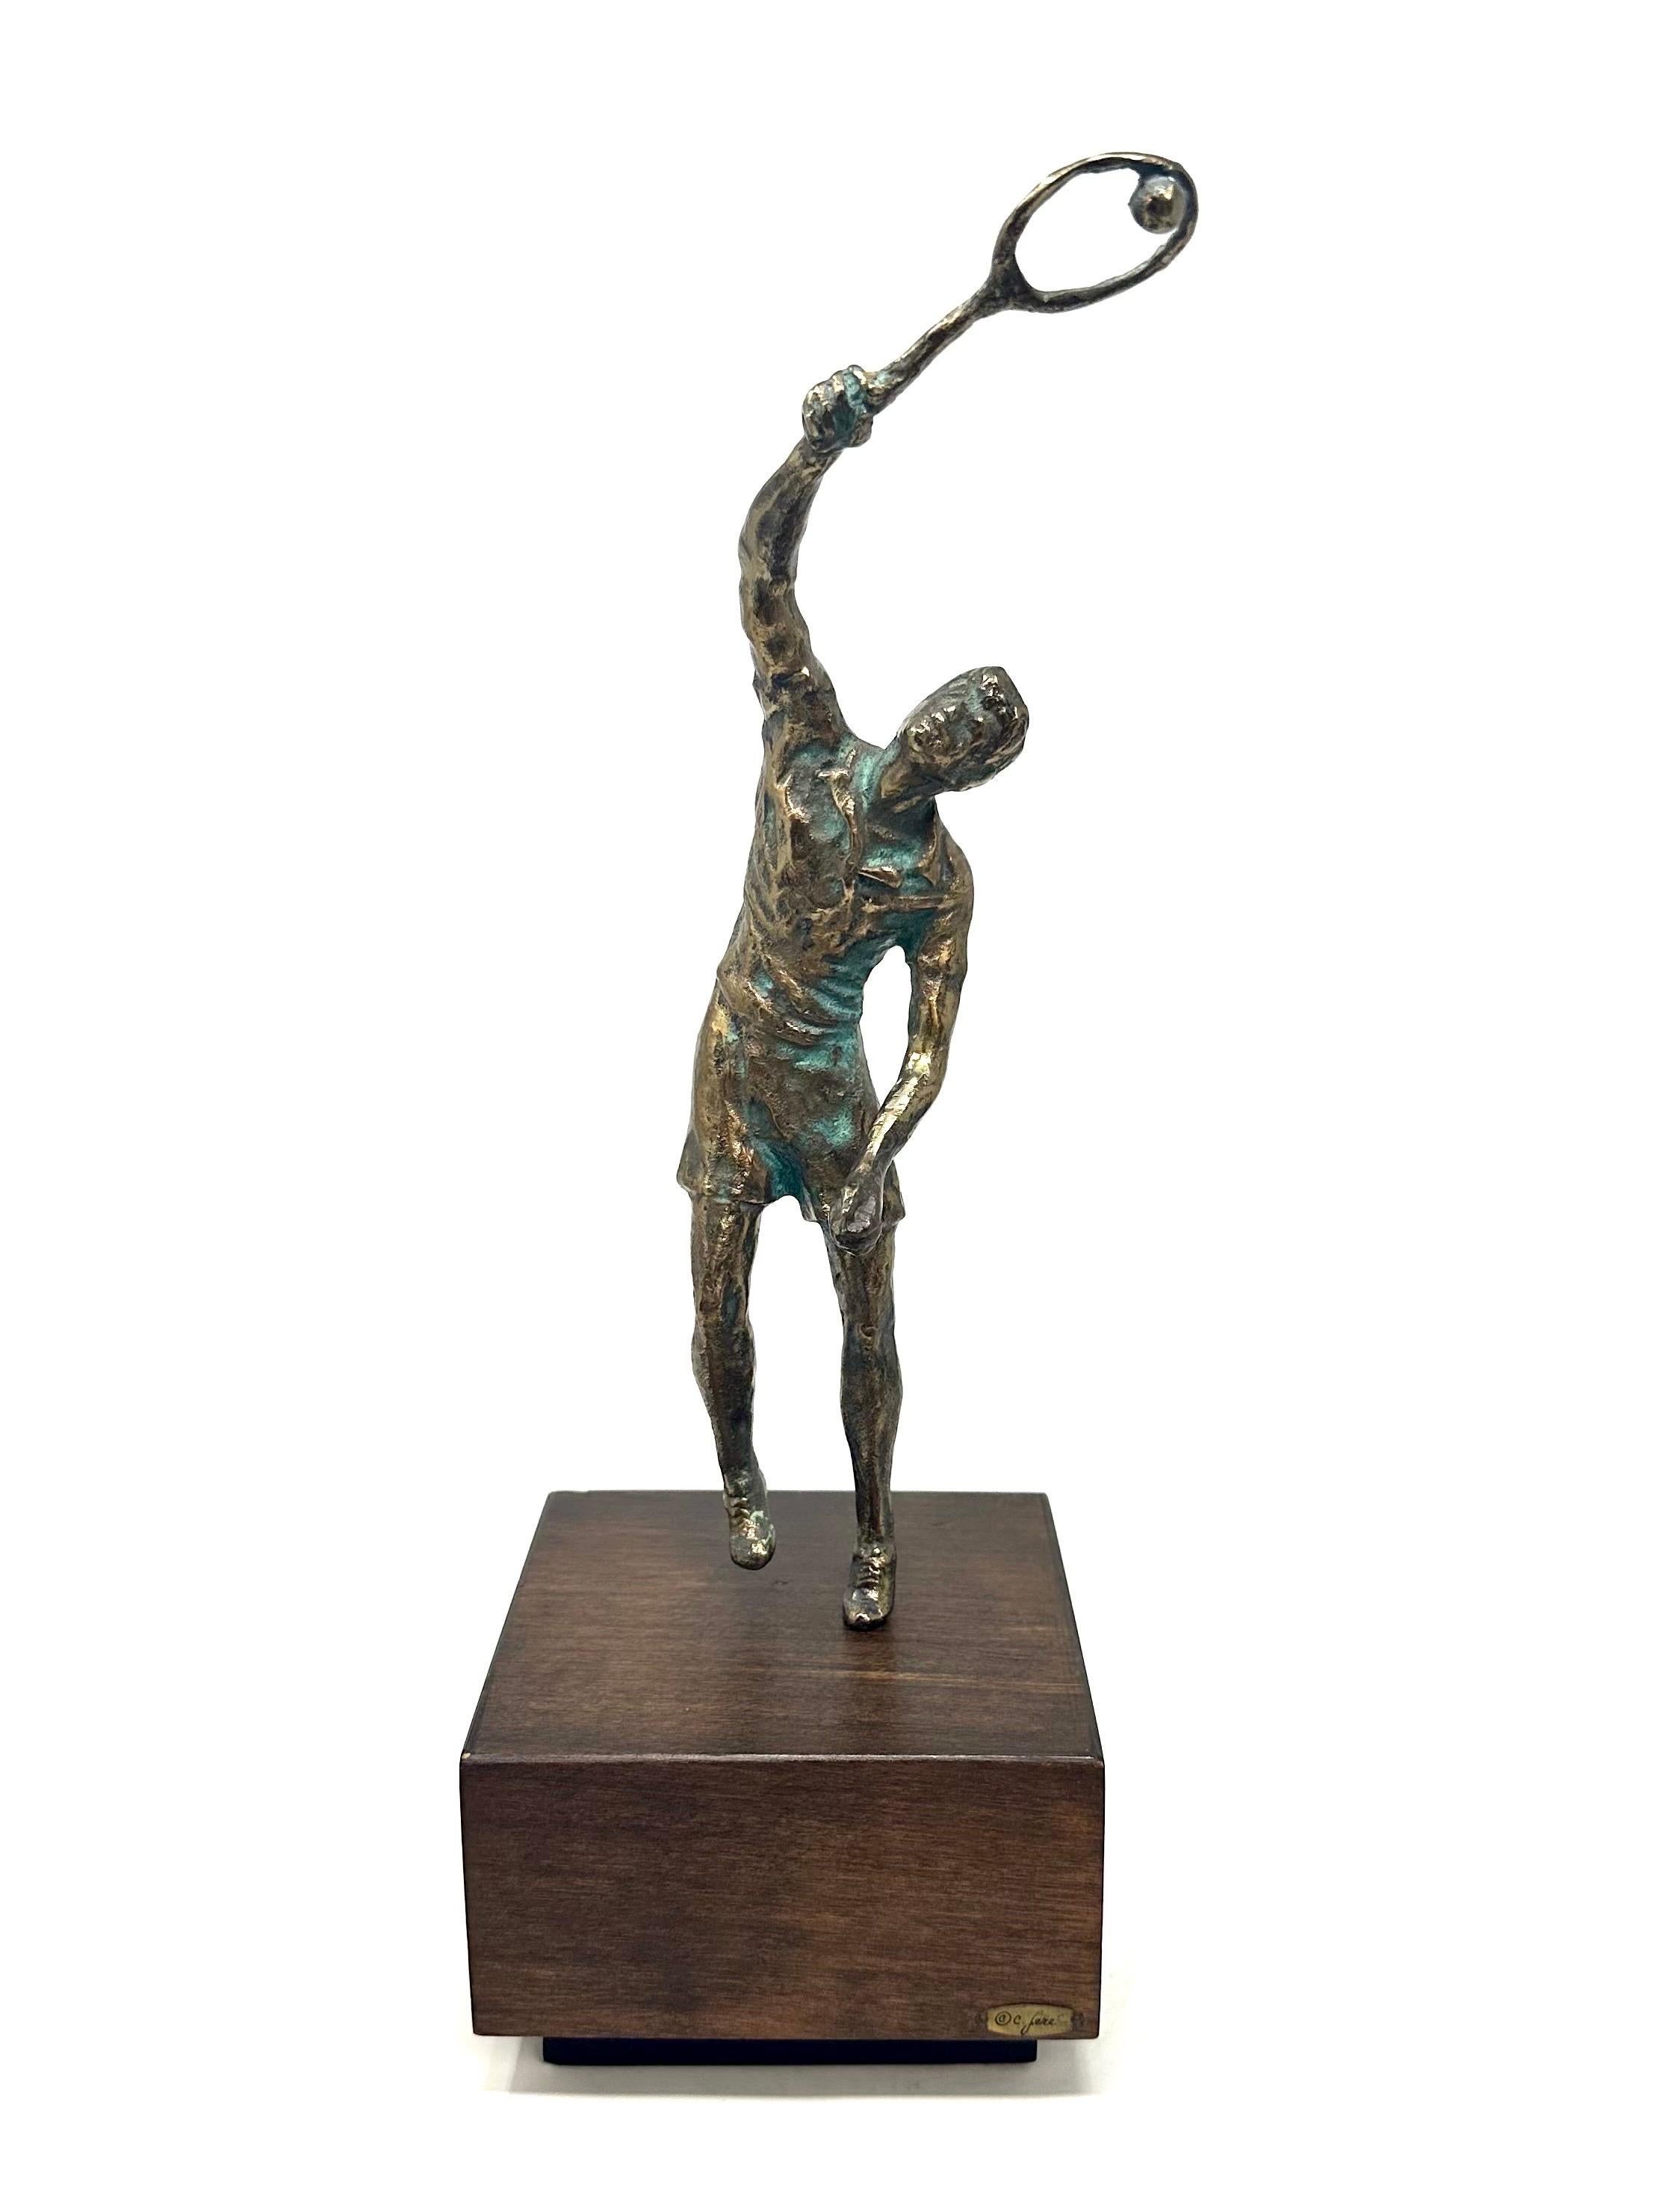 1970s bronze tennis player sculpture by Curtis Jere for Artisan House. The player stands on a wooden base, signed “C. Jere.” In excellent condition, with wear consistent with age and use.

Width 5.5 in / Depth: 5.5 in / Height: 15.75 in